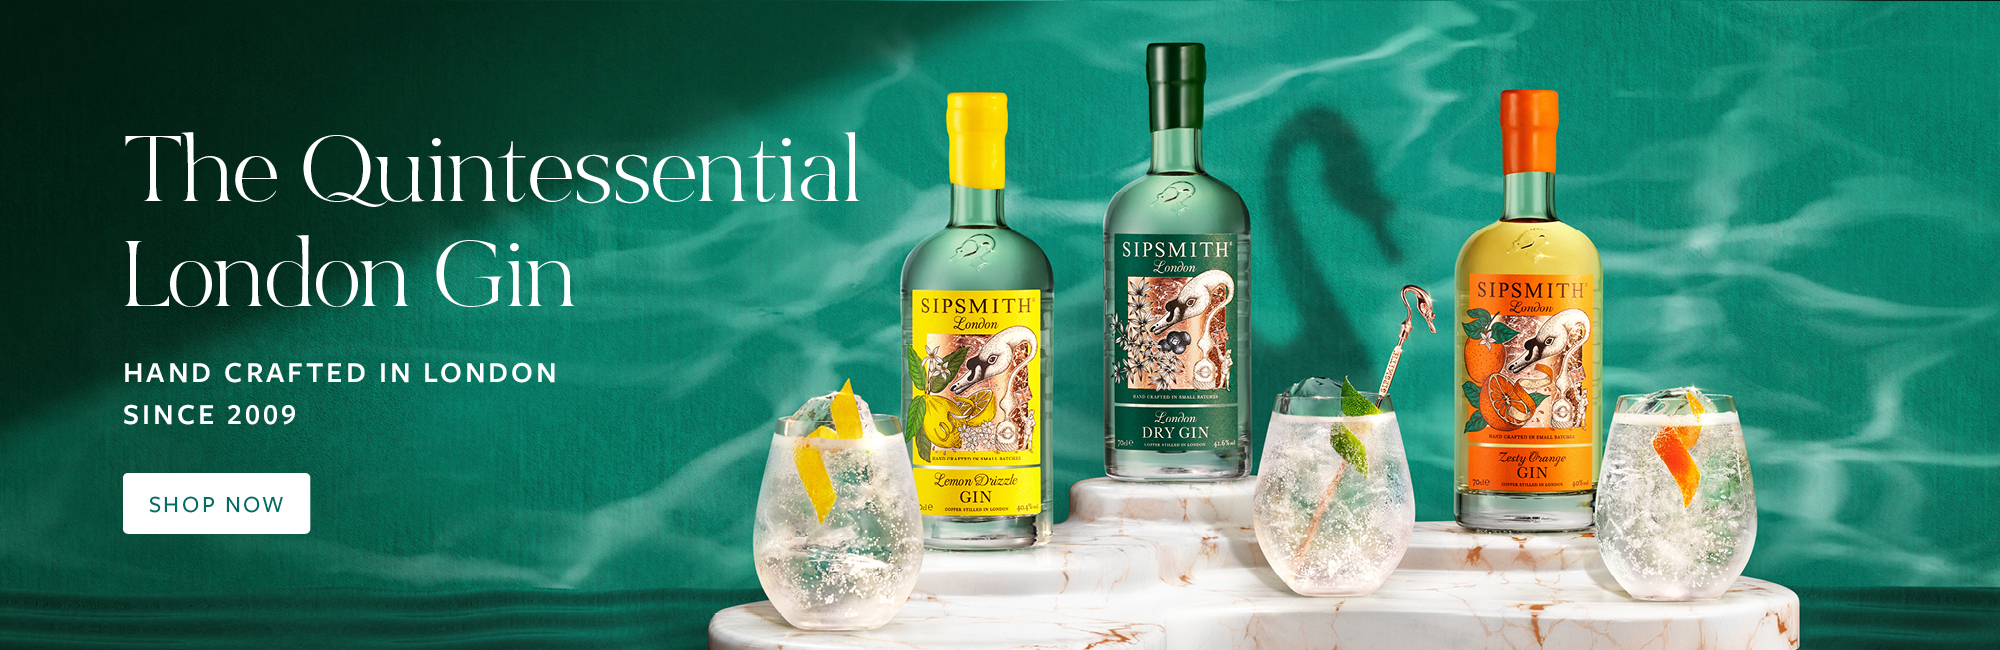 sipsmith homepage banner